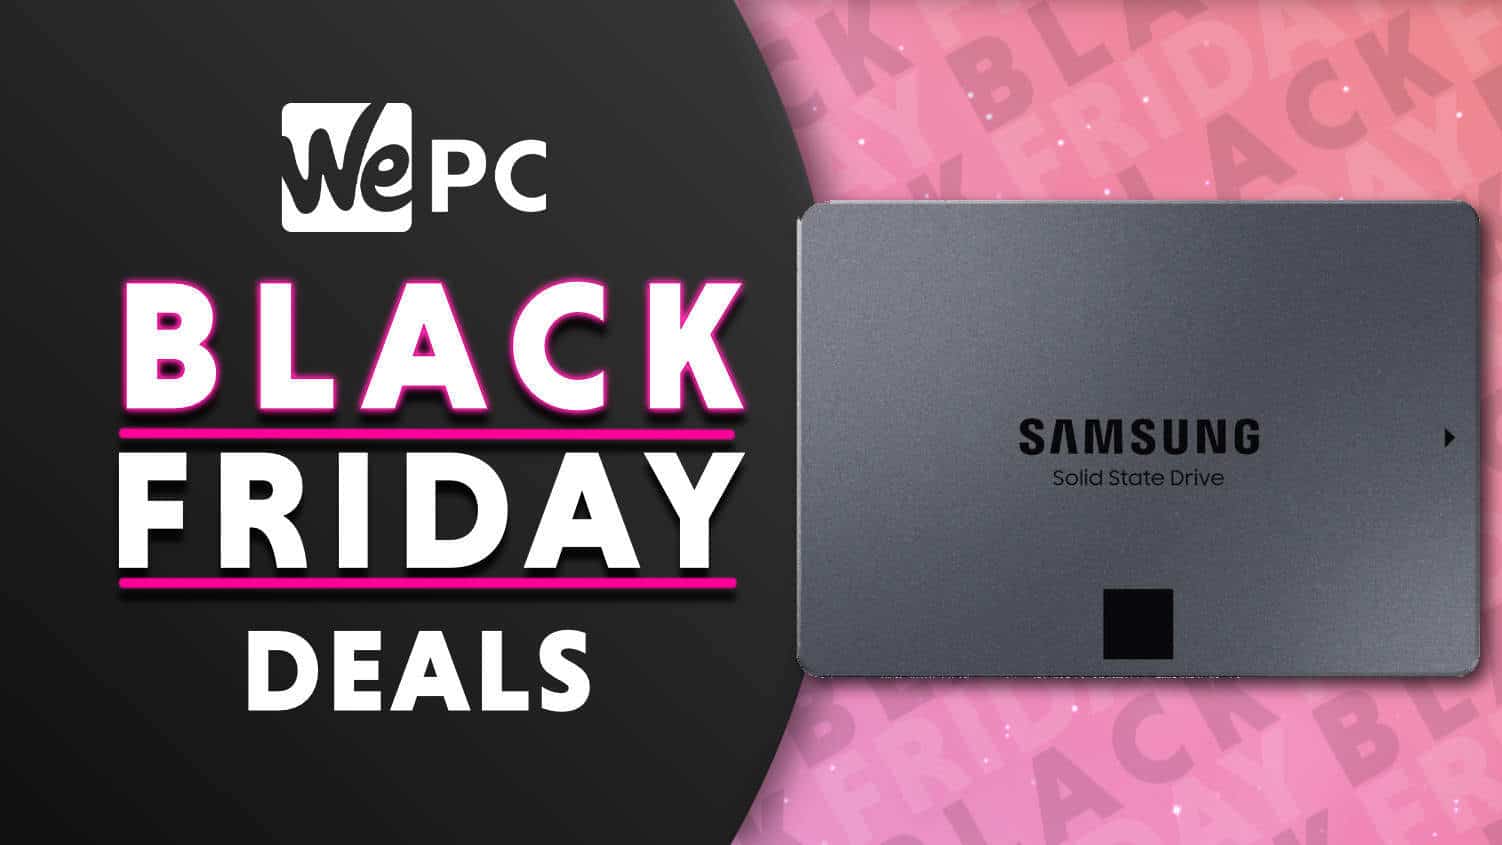 Get 18% off an 8TB Samsung SSD early Black Friday 2021 deals